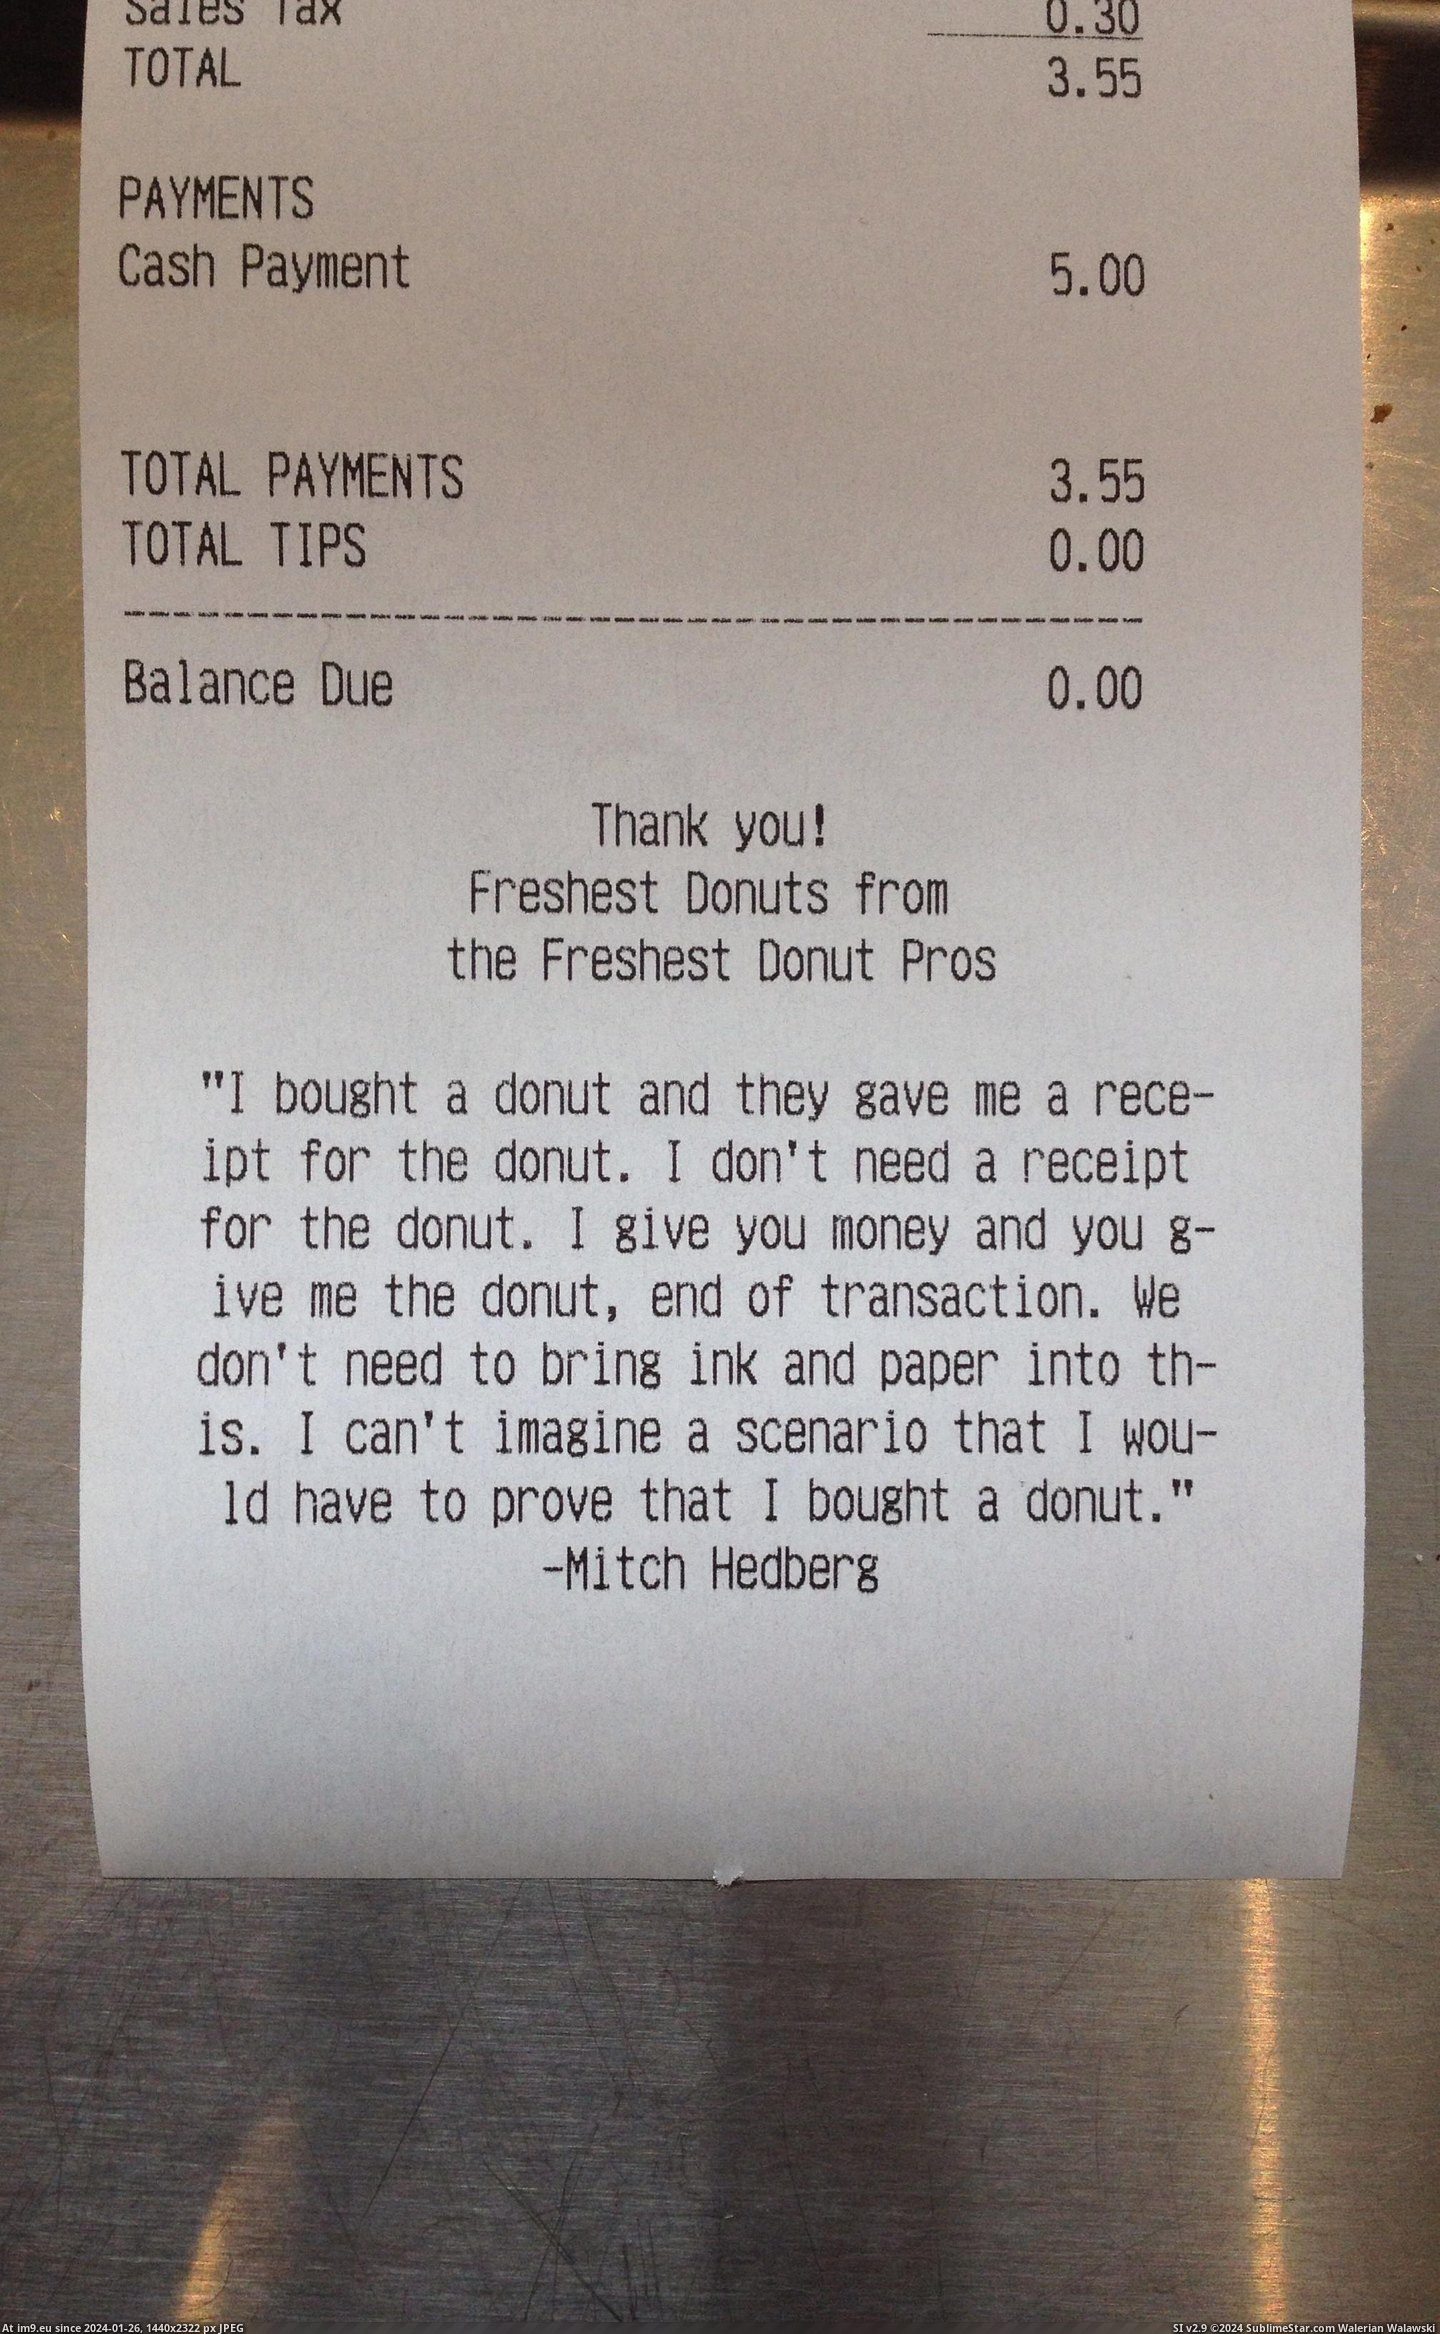 #Funny #Was #Work #Ability #Doughnut #Firs #Receipts #Shop #Control #Printed [Funny] I was given the ability to control what gets printed on the receipts at the doughnut shop where I work. This is the firs Pic. (Image of album My r/FUNNY favs))